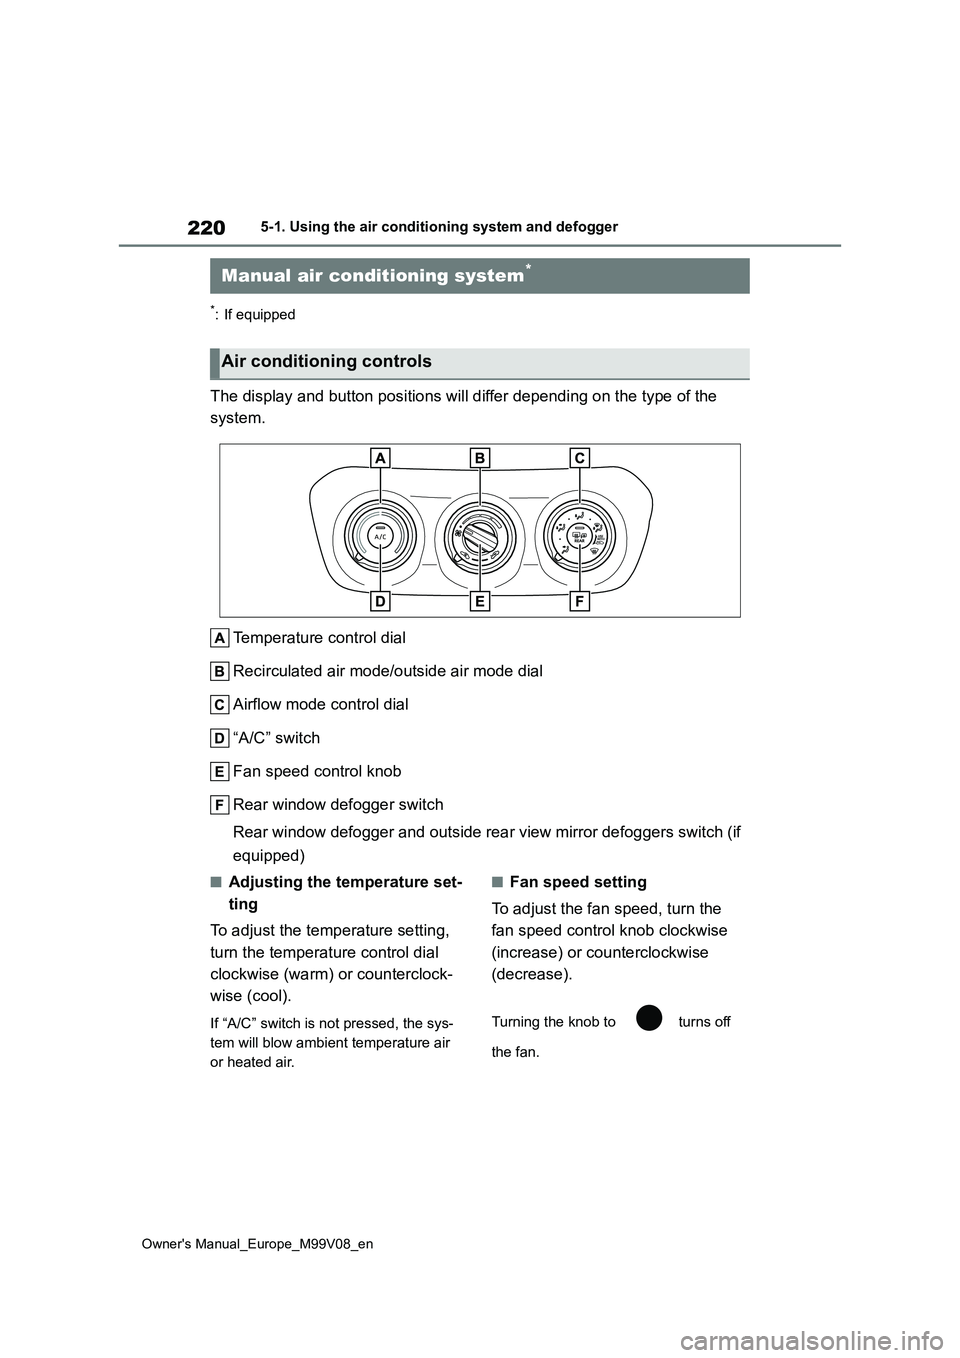 TOYOTA AYGO X 2022  Owners Manual (in English) 220
Owner's Manual_Europe_M99V08_en
5-1. Using the air conditioning system and defogger
5-1.Using the  a ir c onditioning sys te m and  de fog ger
*: If equipped
The display and button positions w